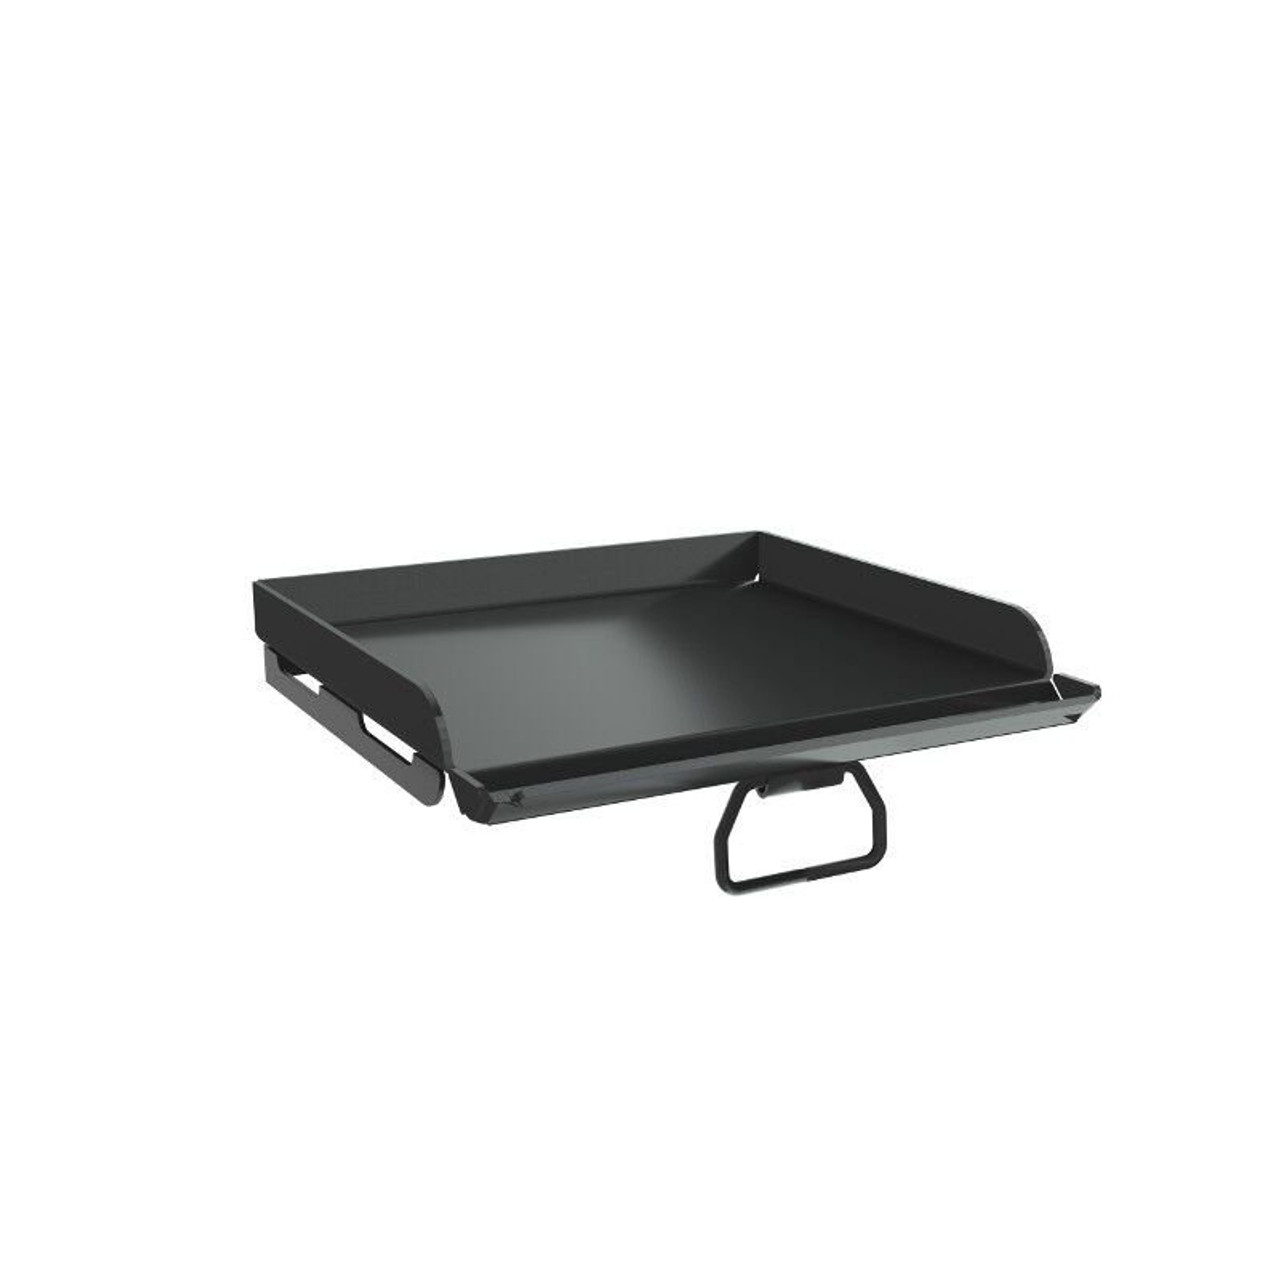 Camp Chef 14 x 12 Large Professional Heavy-Duty Steel Flat Top Griddle -  SG14